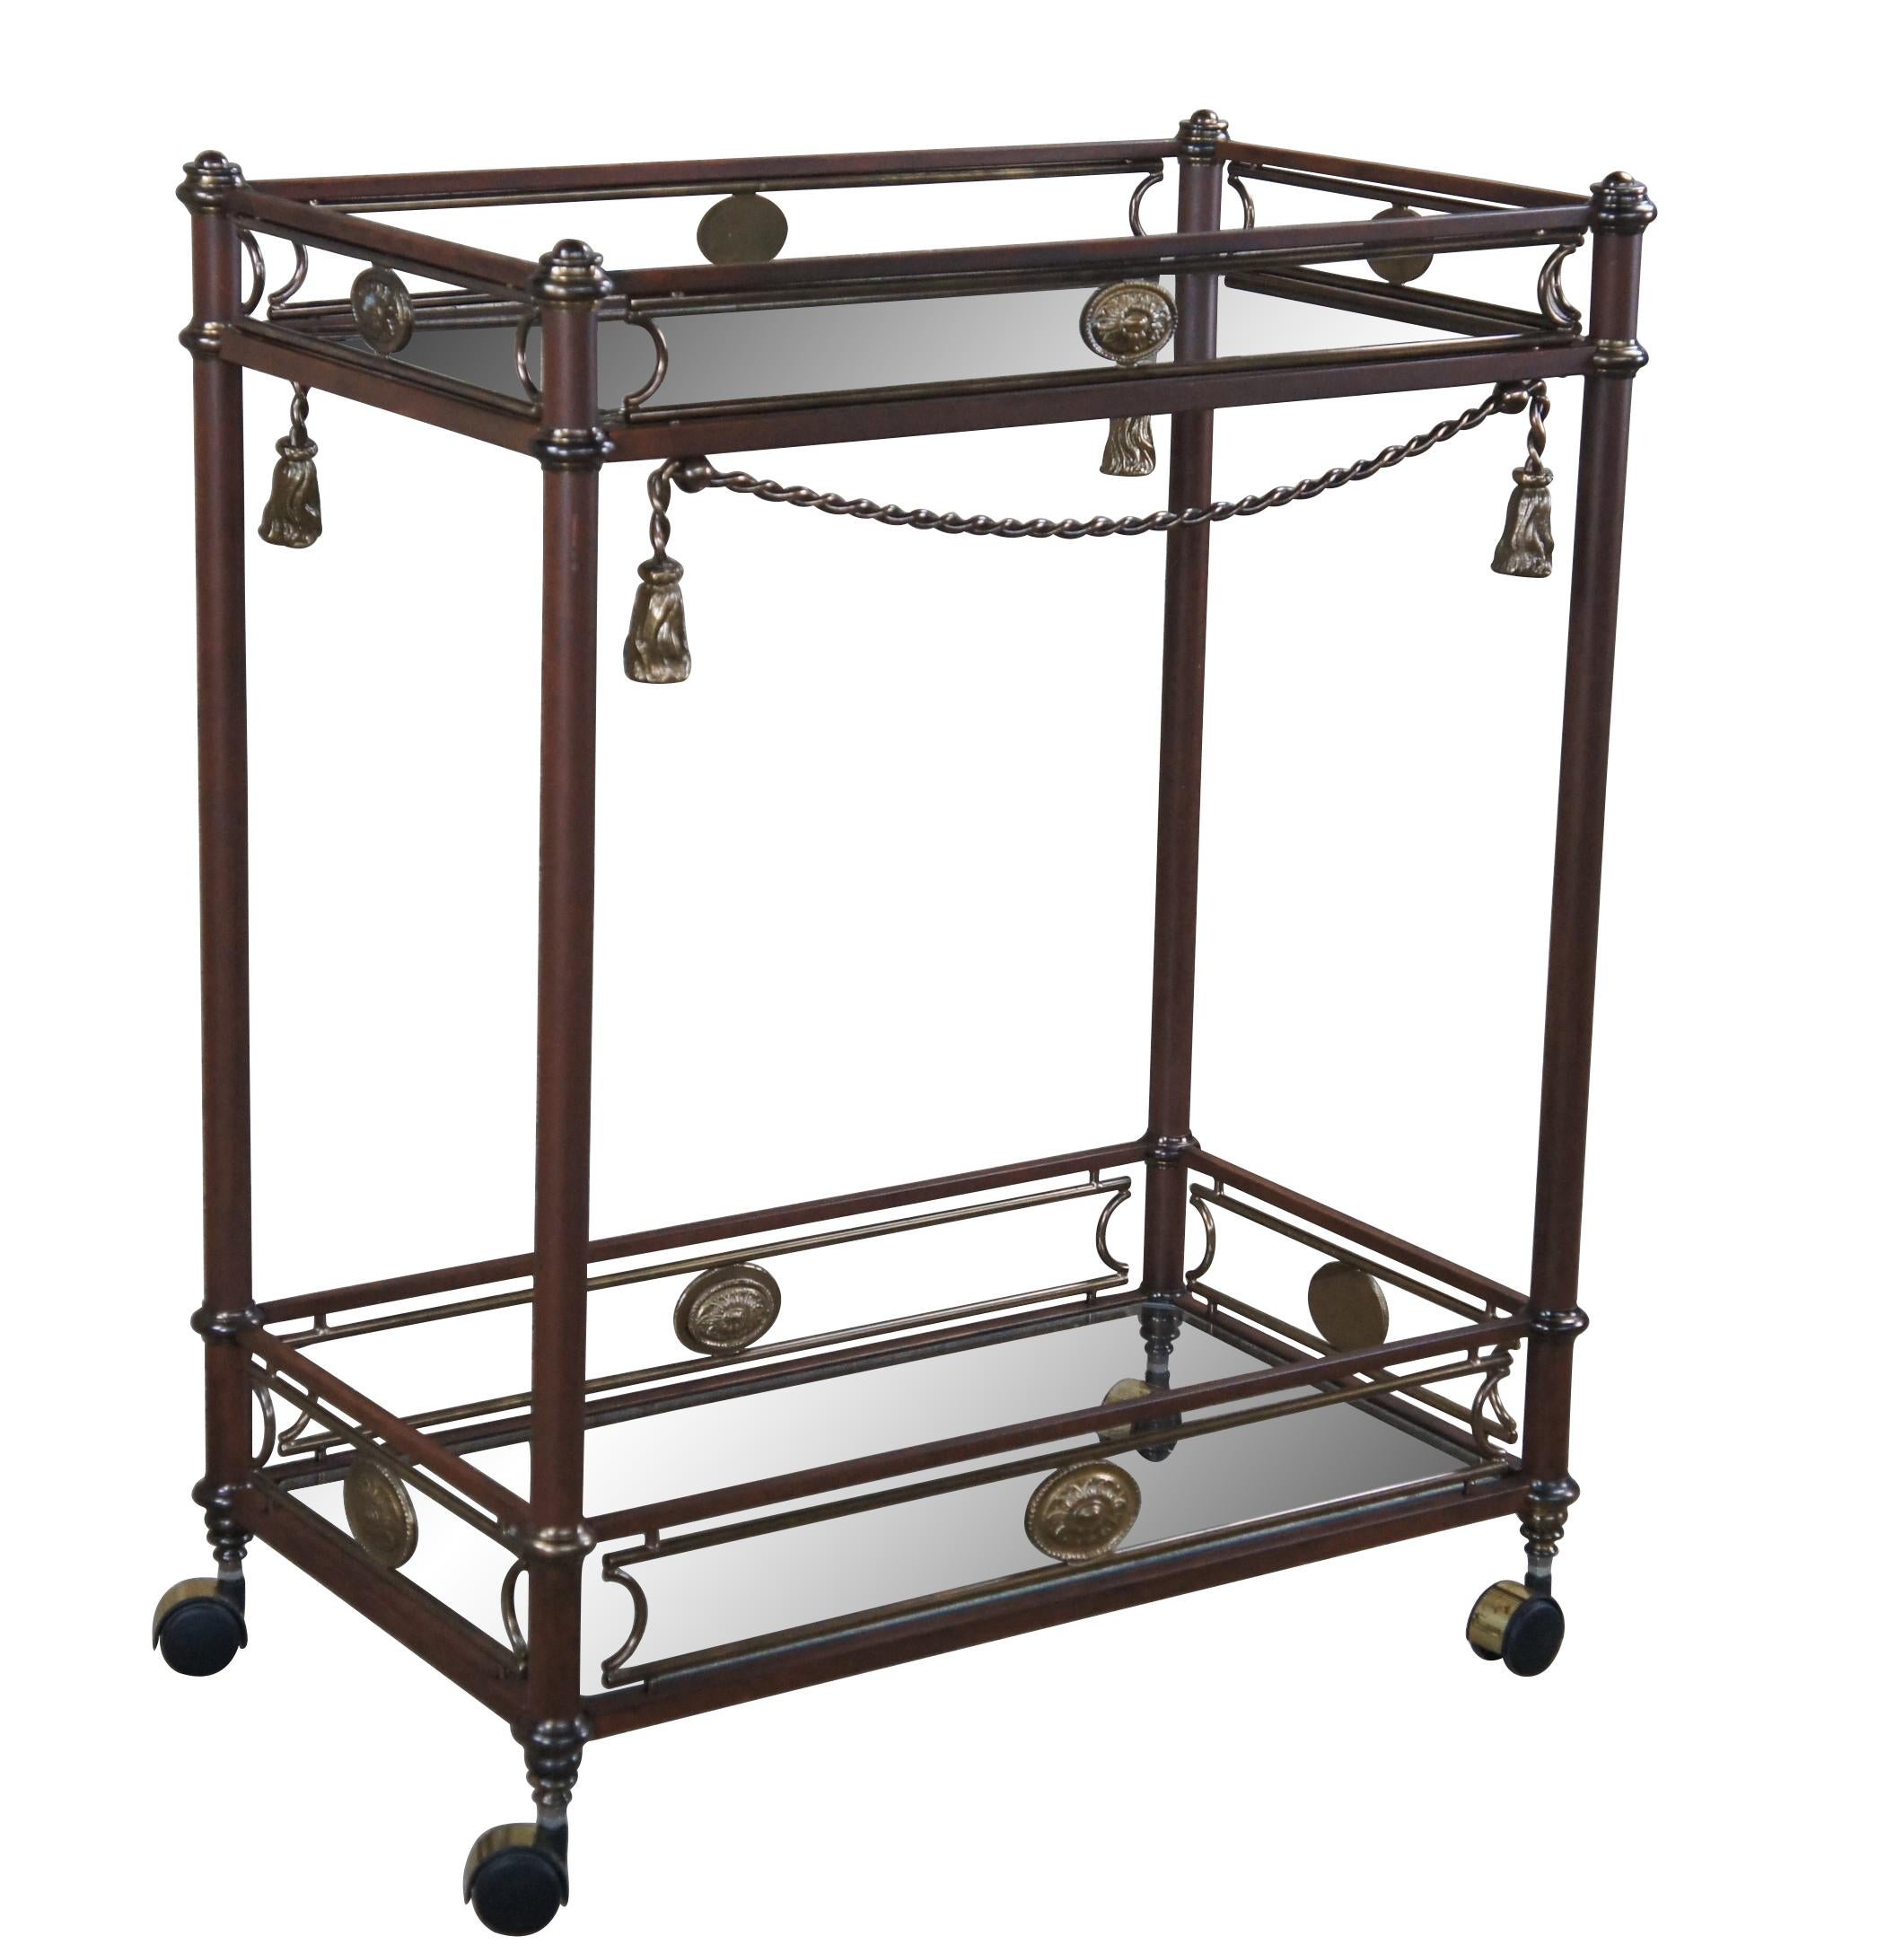 Vintage Butlers tea trolly or swivel bar cart.  Made of metal and glass featuring tiered form with brass accented upper and lower galleries and Neoclassical medallions and tassels.  

Dimensions:
15.5